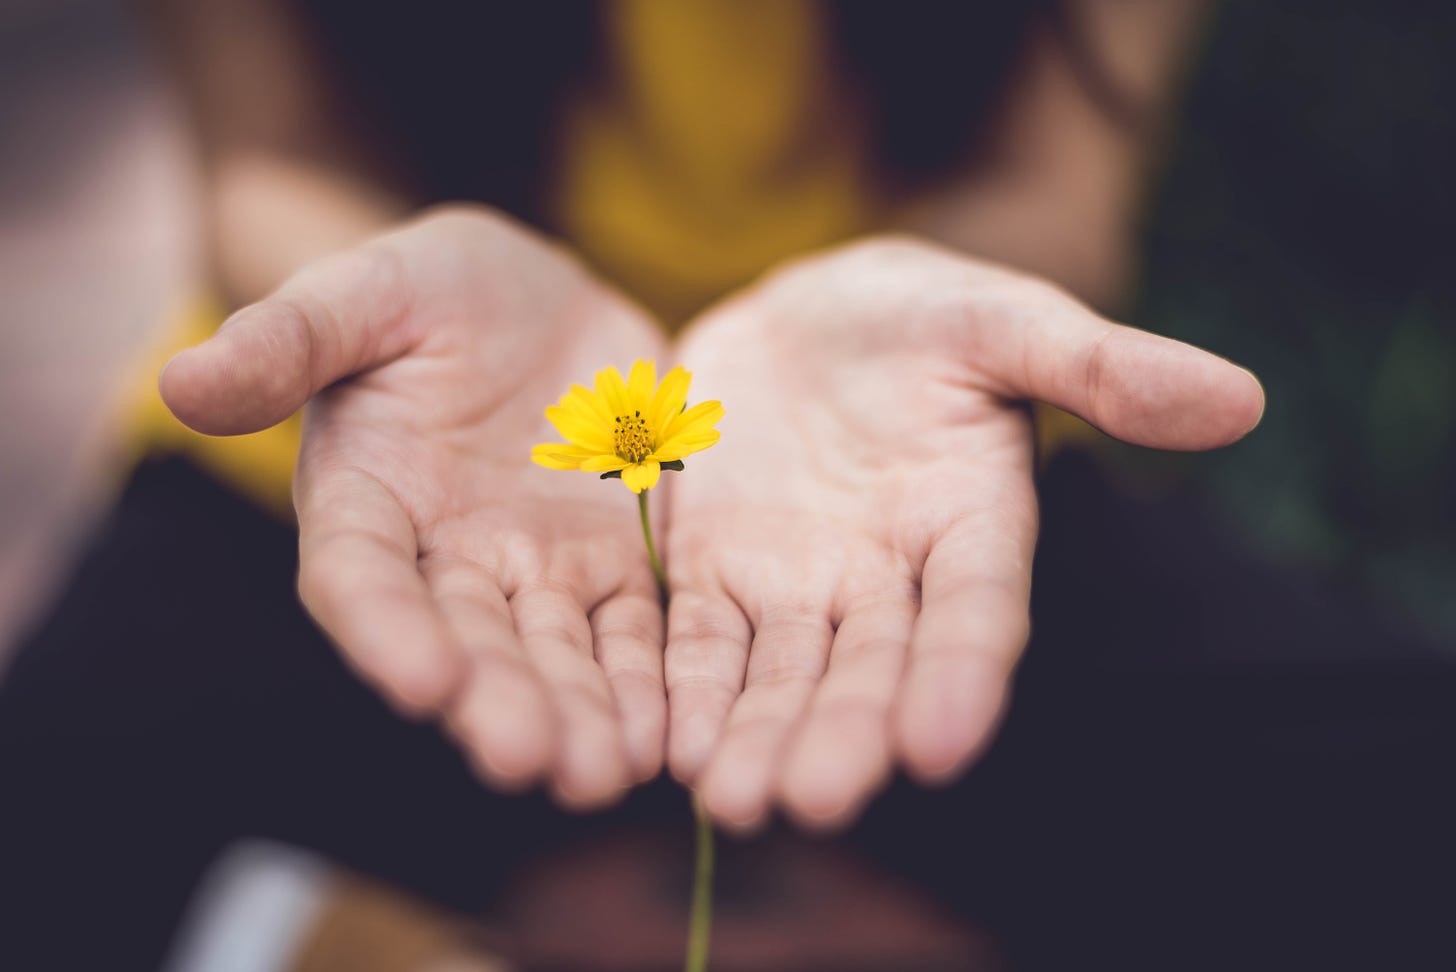 Image shows two hands held together and cupping a small yellow flower